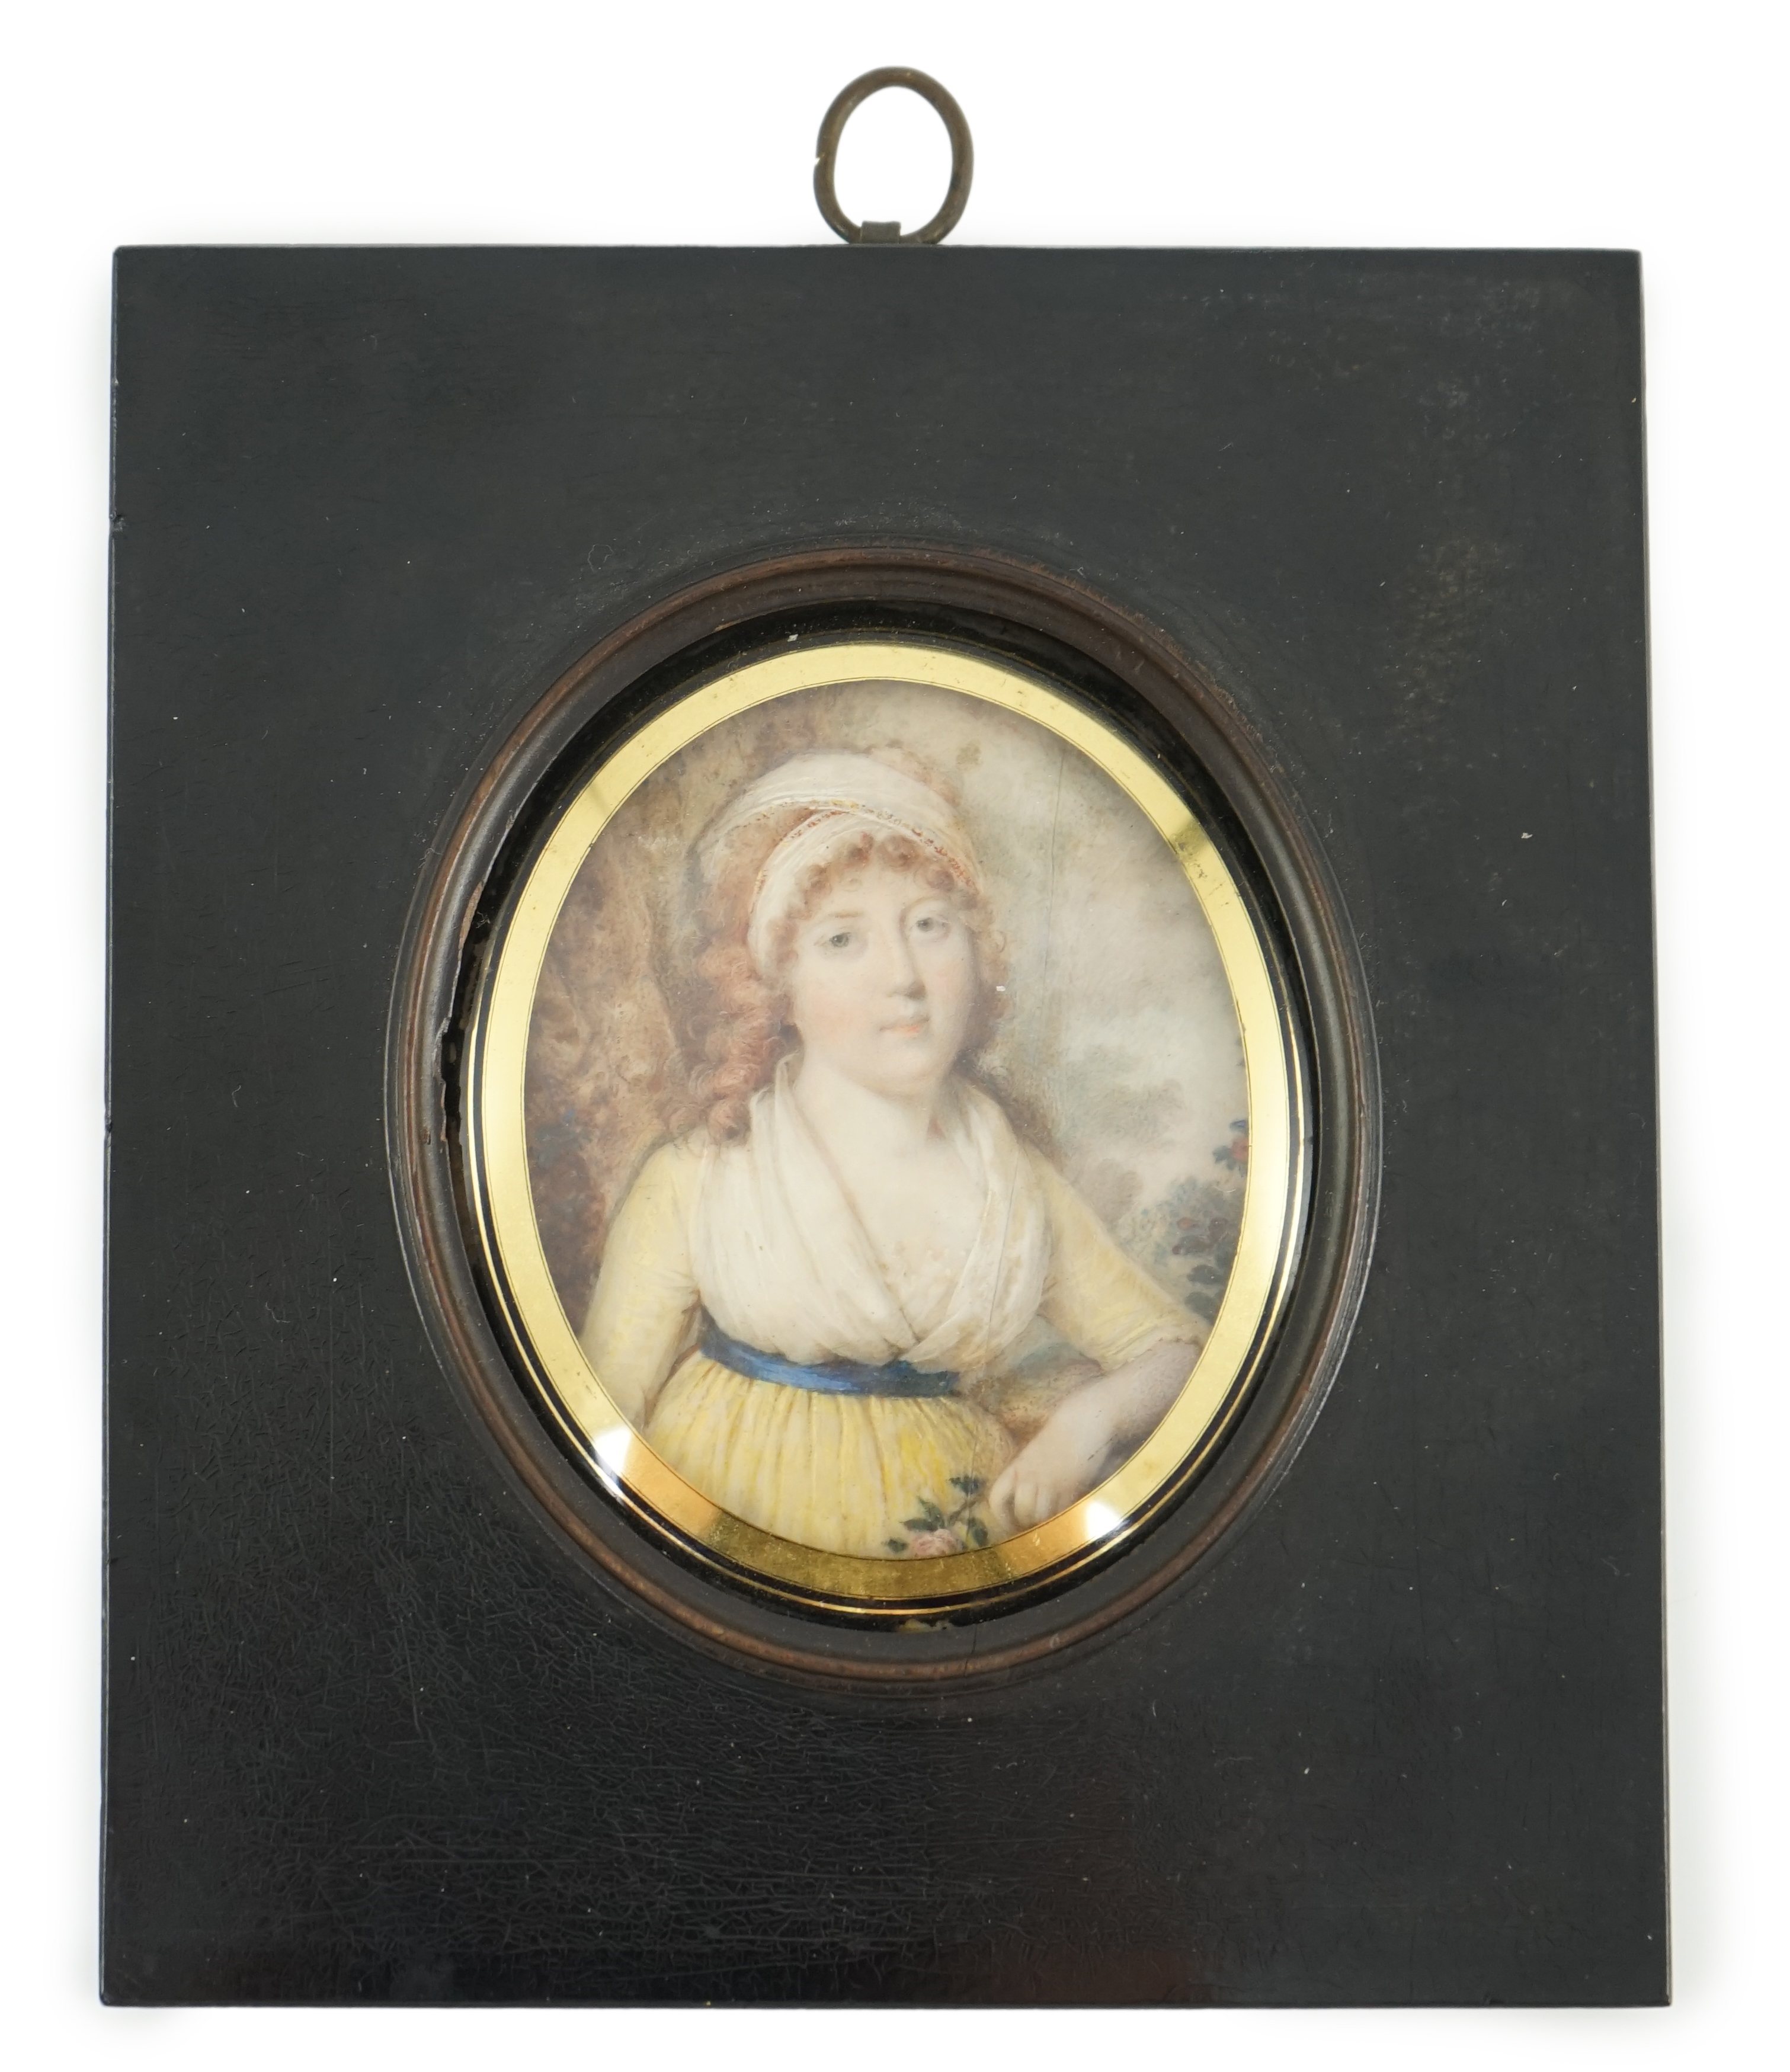 Louis-Ami Arlaud-Jurine (Swiss, 1751-1829), Portrait miniature of Princess Sophie of Gloucester (1773-1844), watercolour on ivory, 6.8 x 5.5cm. CITES Submission reference J86HS2XF